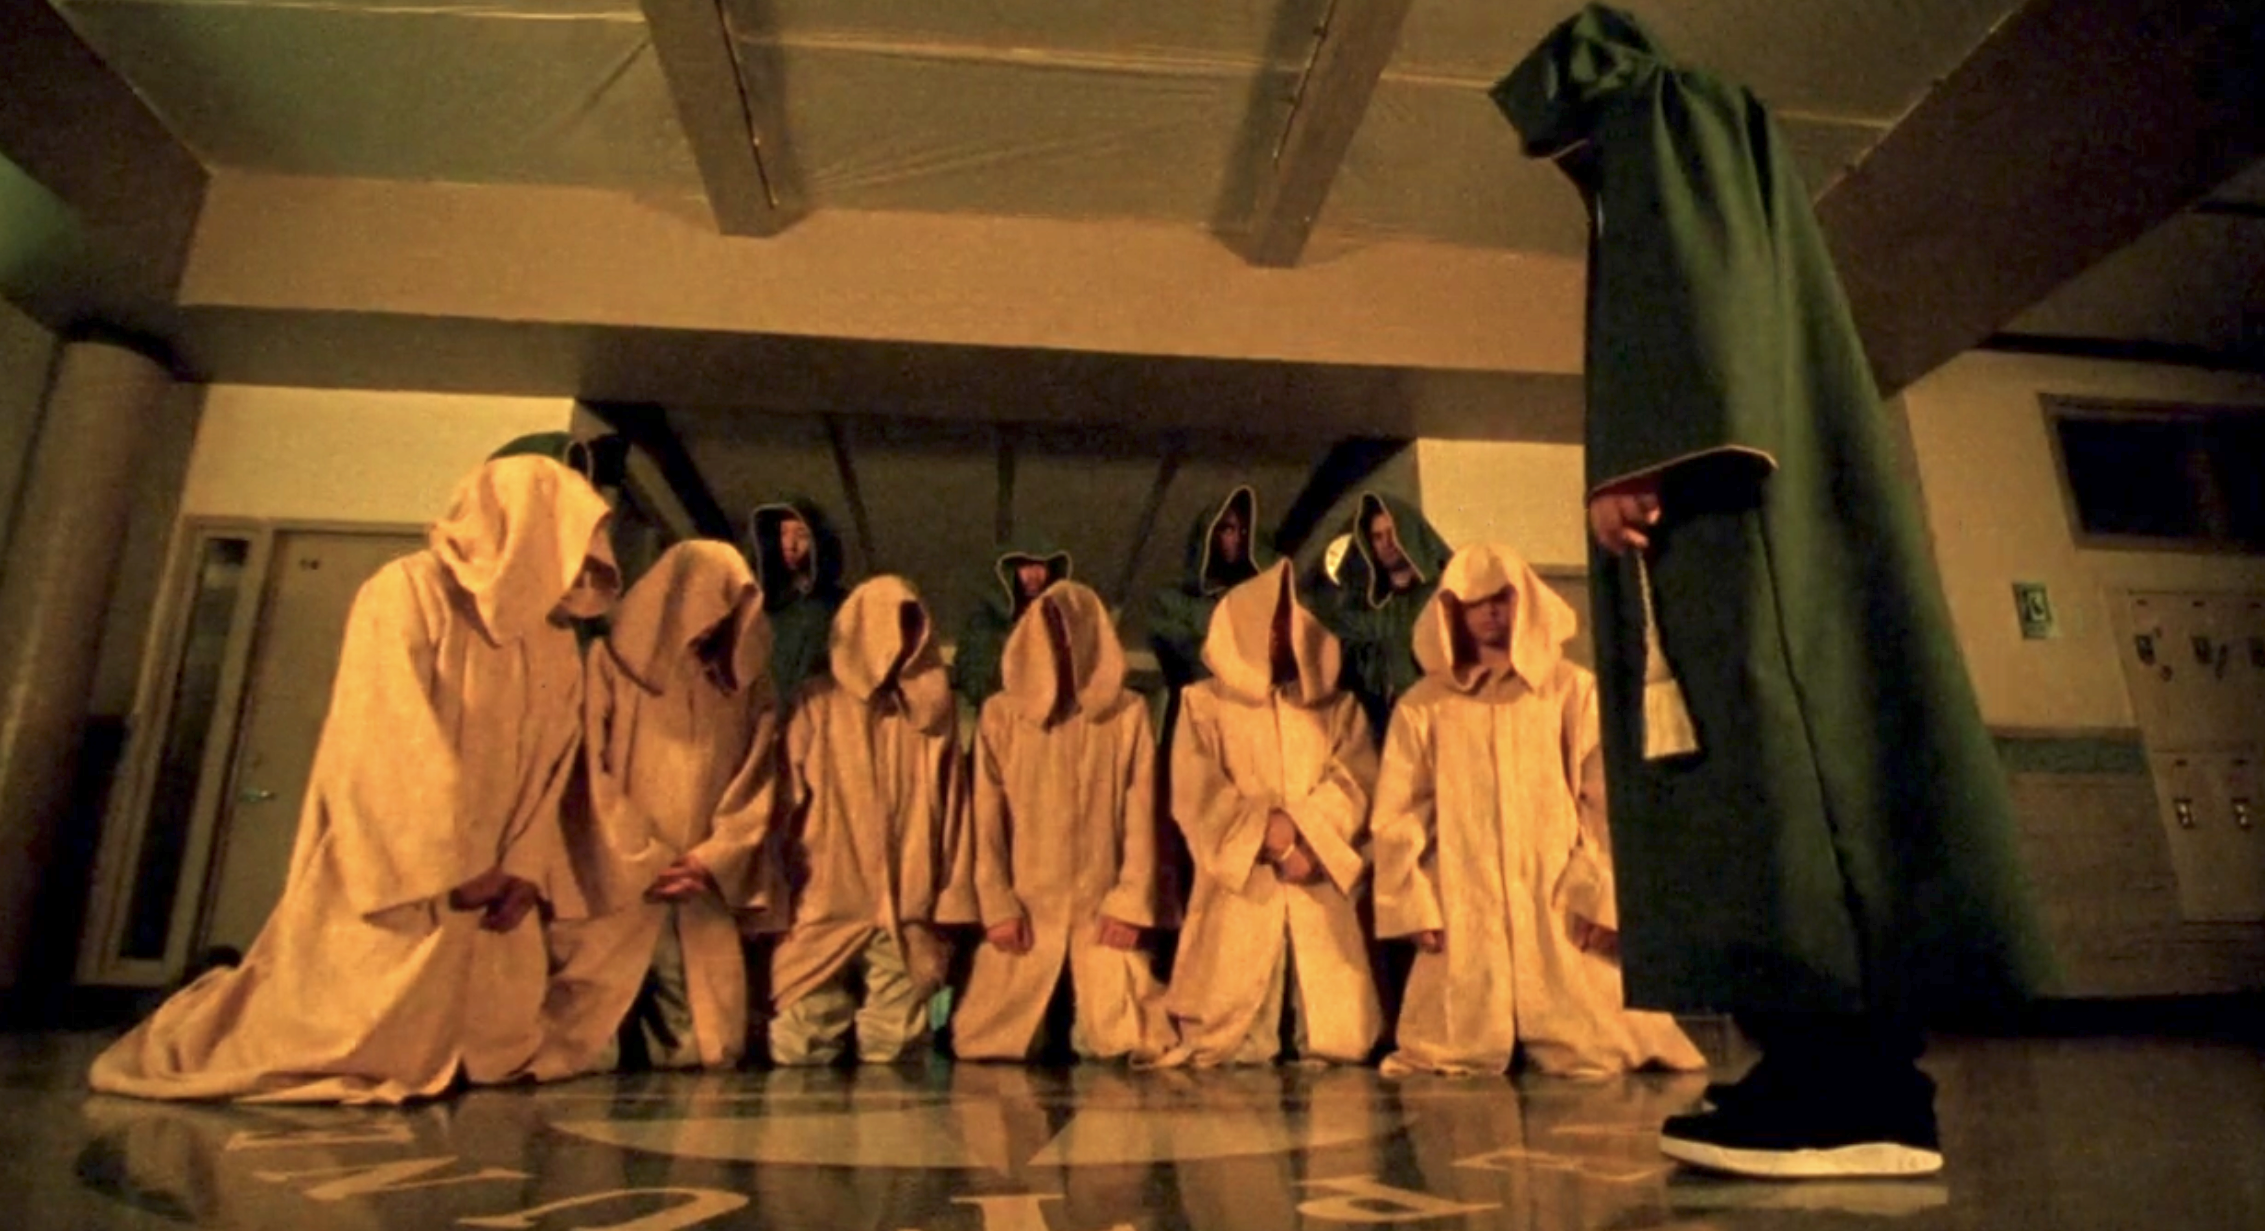 Screenshot from S1E12 of Veronica Mars. Six people in yellow hooded cloaks are kneeling on the floor in a hallway of Neptune High. A figure in a green hooded cloak stands in front and to the side. Five more figures in green hooded cloaks stand behind the kneeling figures.